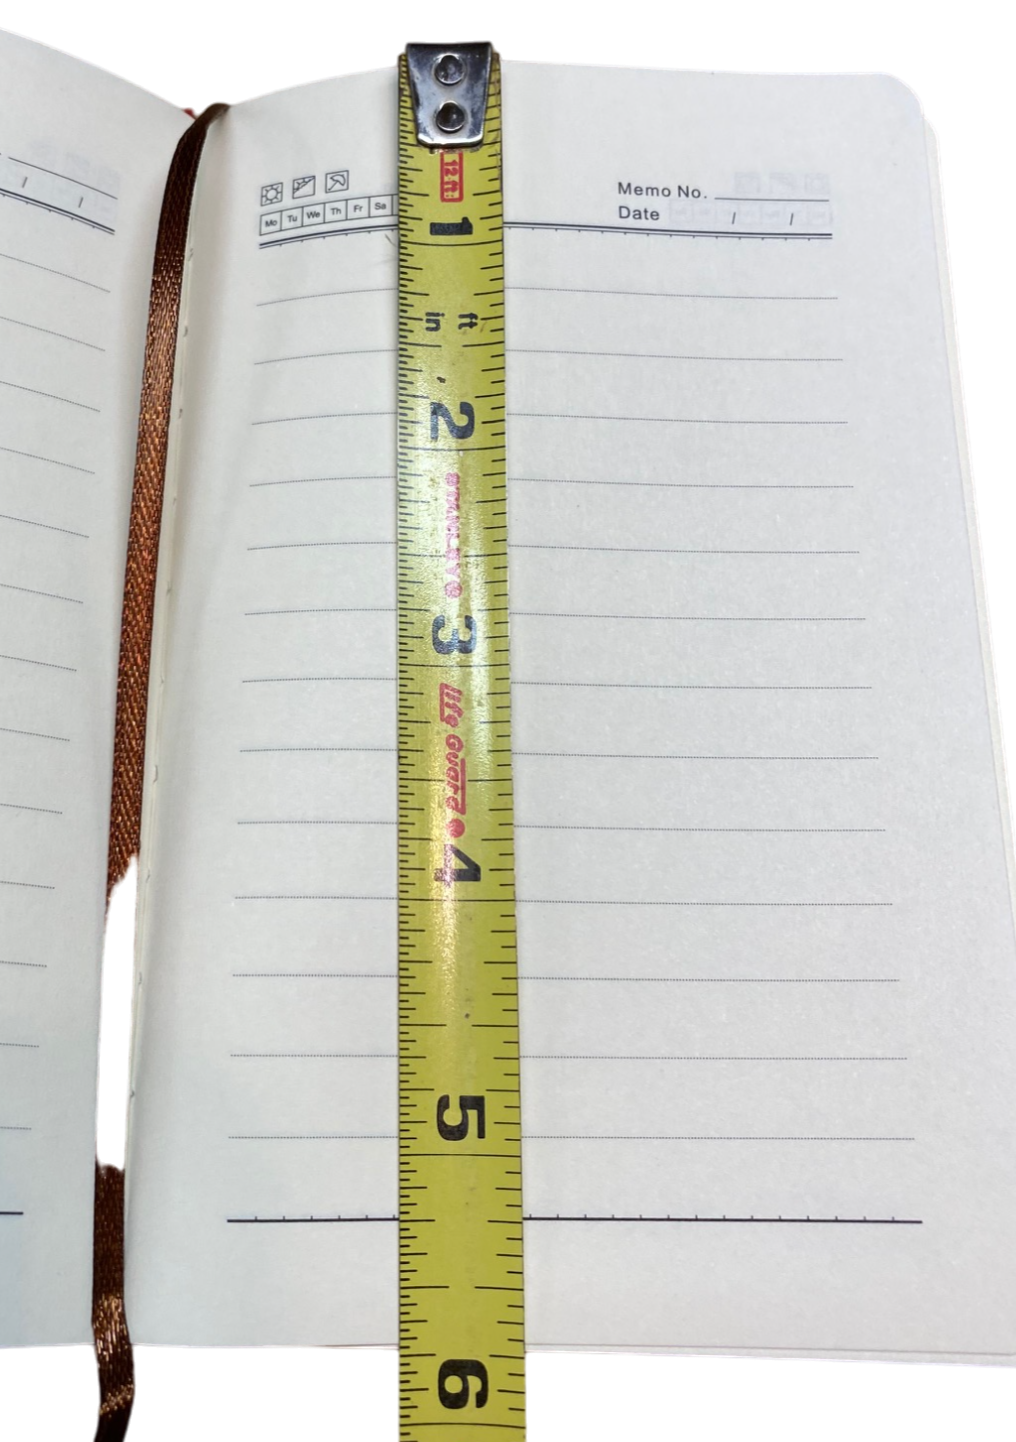 Journal pages measure approx 5.75 inches tall